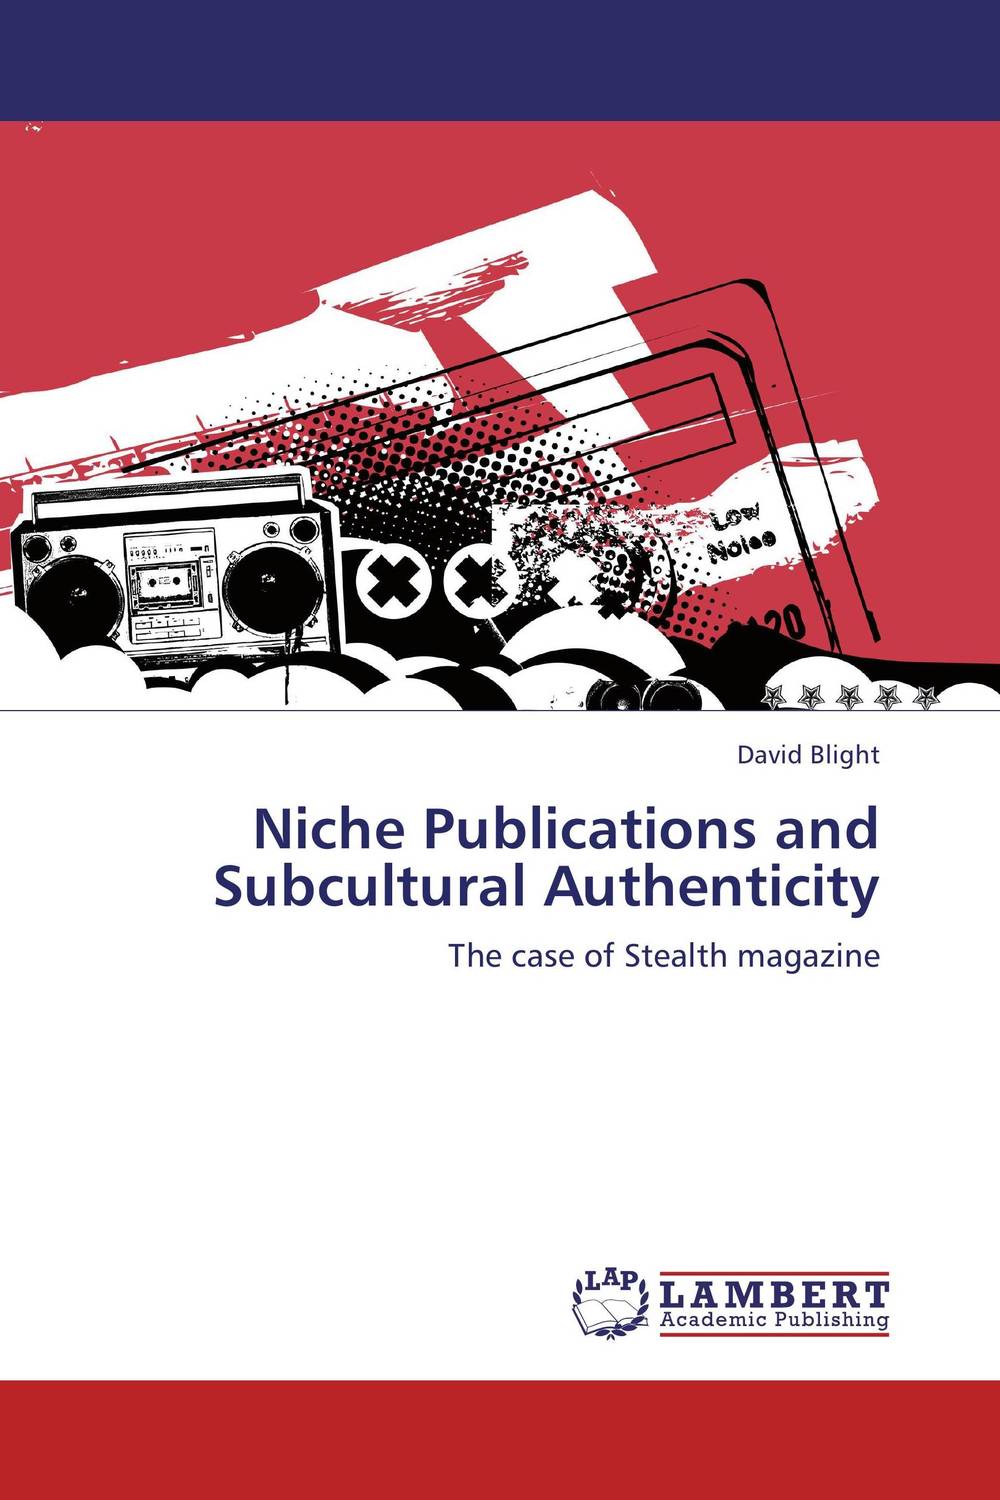 Niche Publications and Subcultural Authenticity: The Case of Stealth Magazine